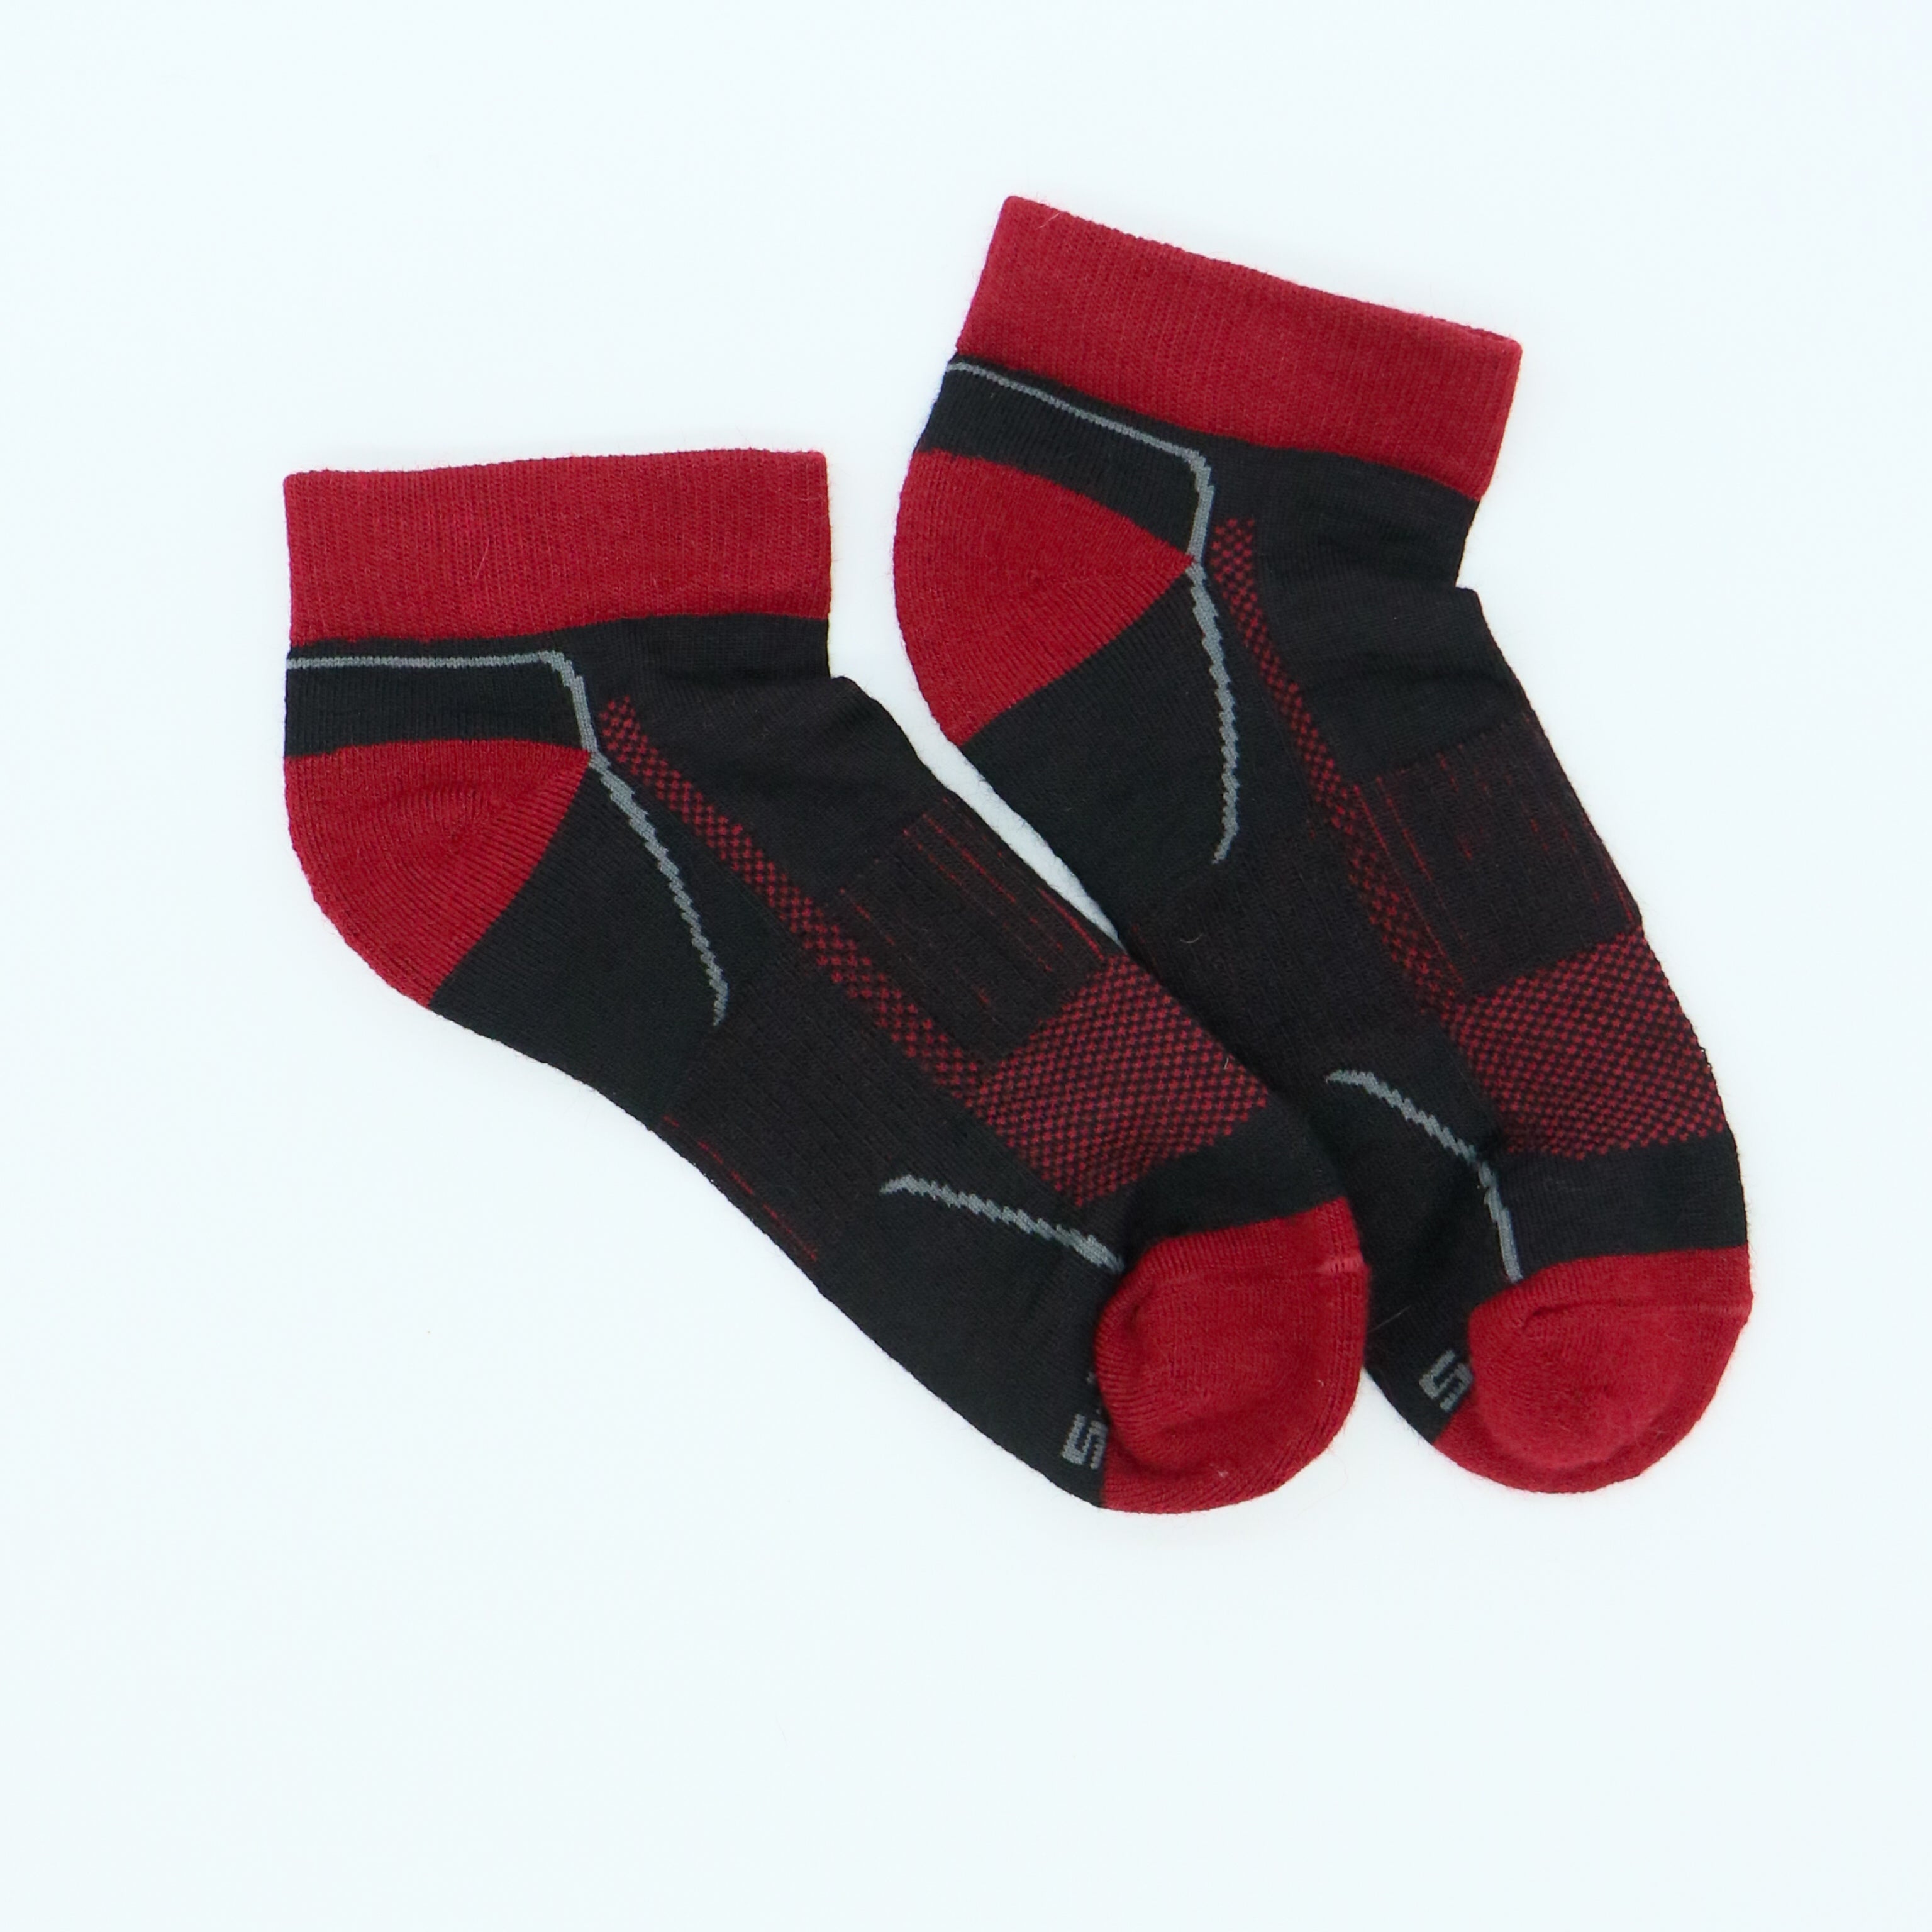 Experience Comfort and Versatility with Unisex Shorty Athletic Socks